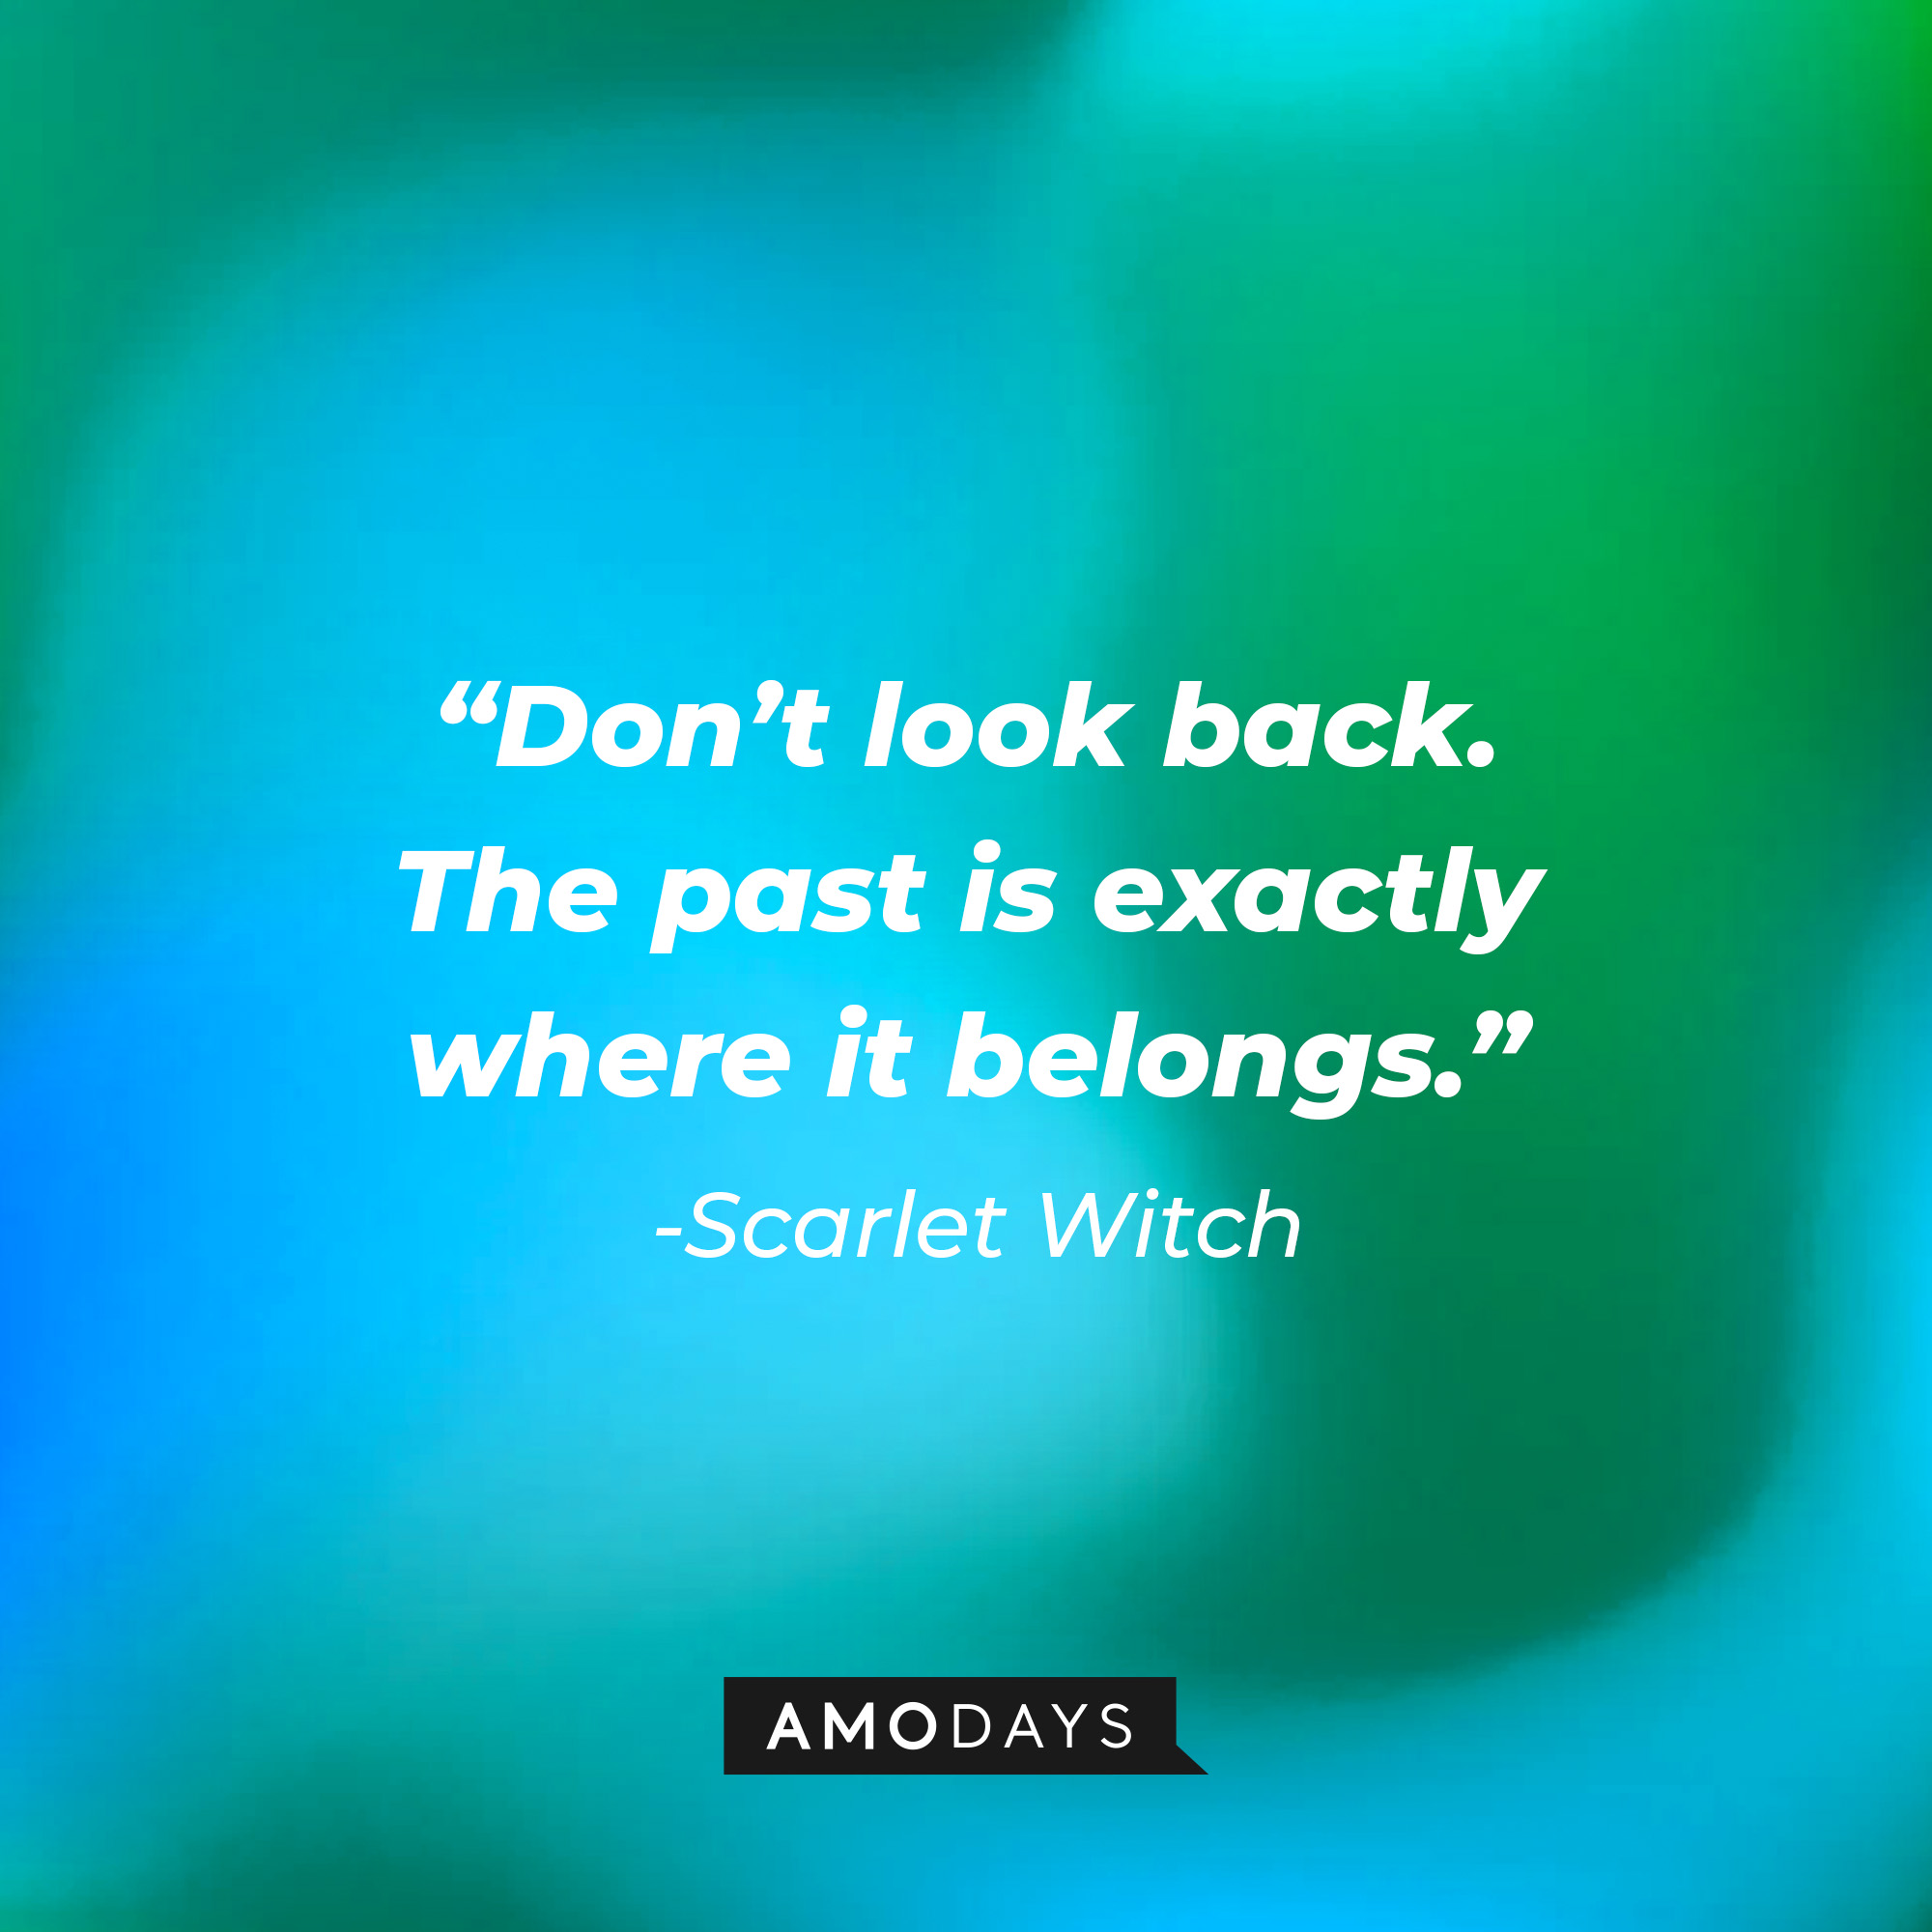 Scarlet Witch’s quote: “Don’t look back. The past is exactly where it belongs.” | Source: AmoDays